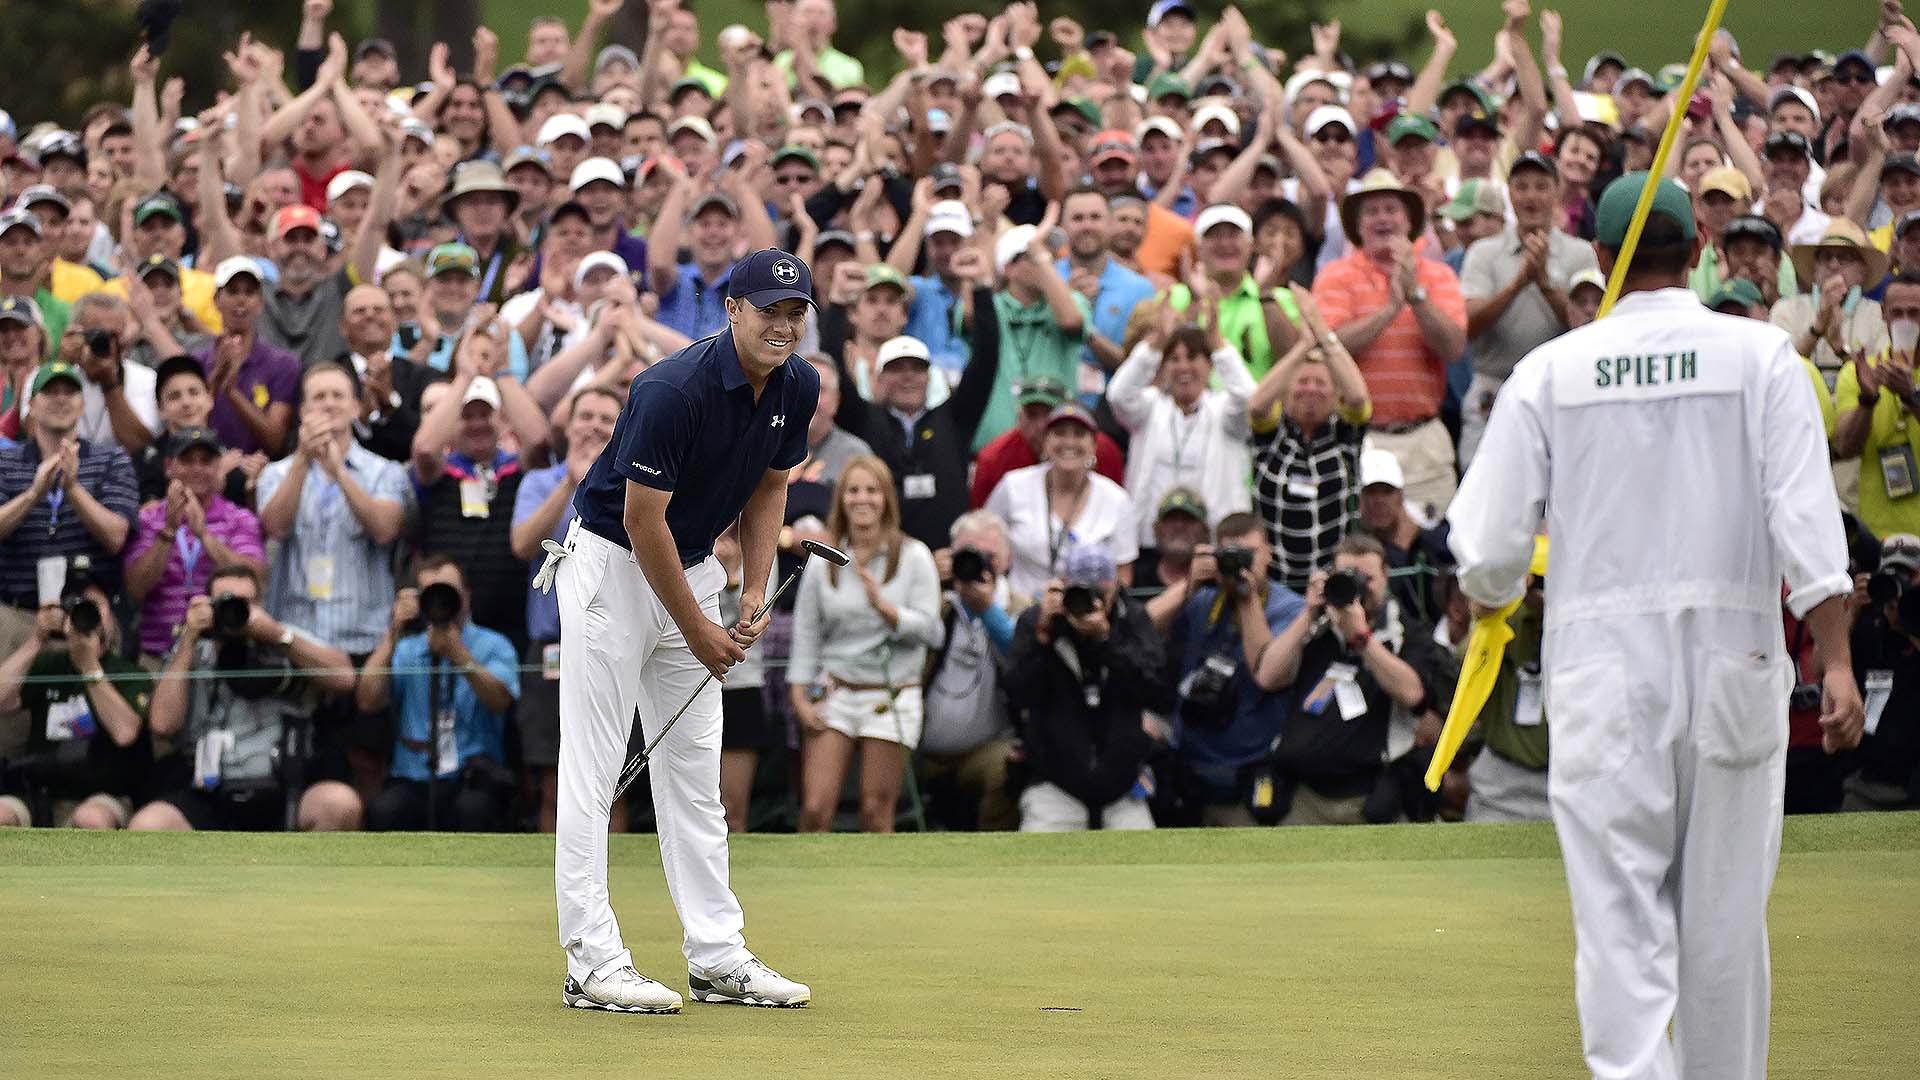 This Masters tradition is a pictorial surprise for champions